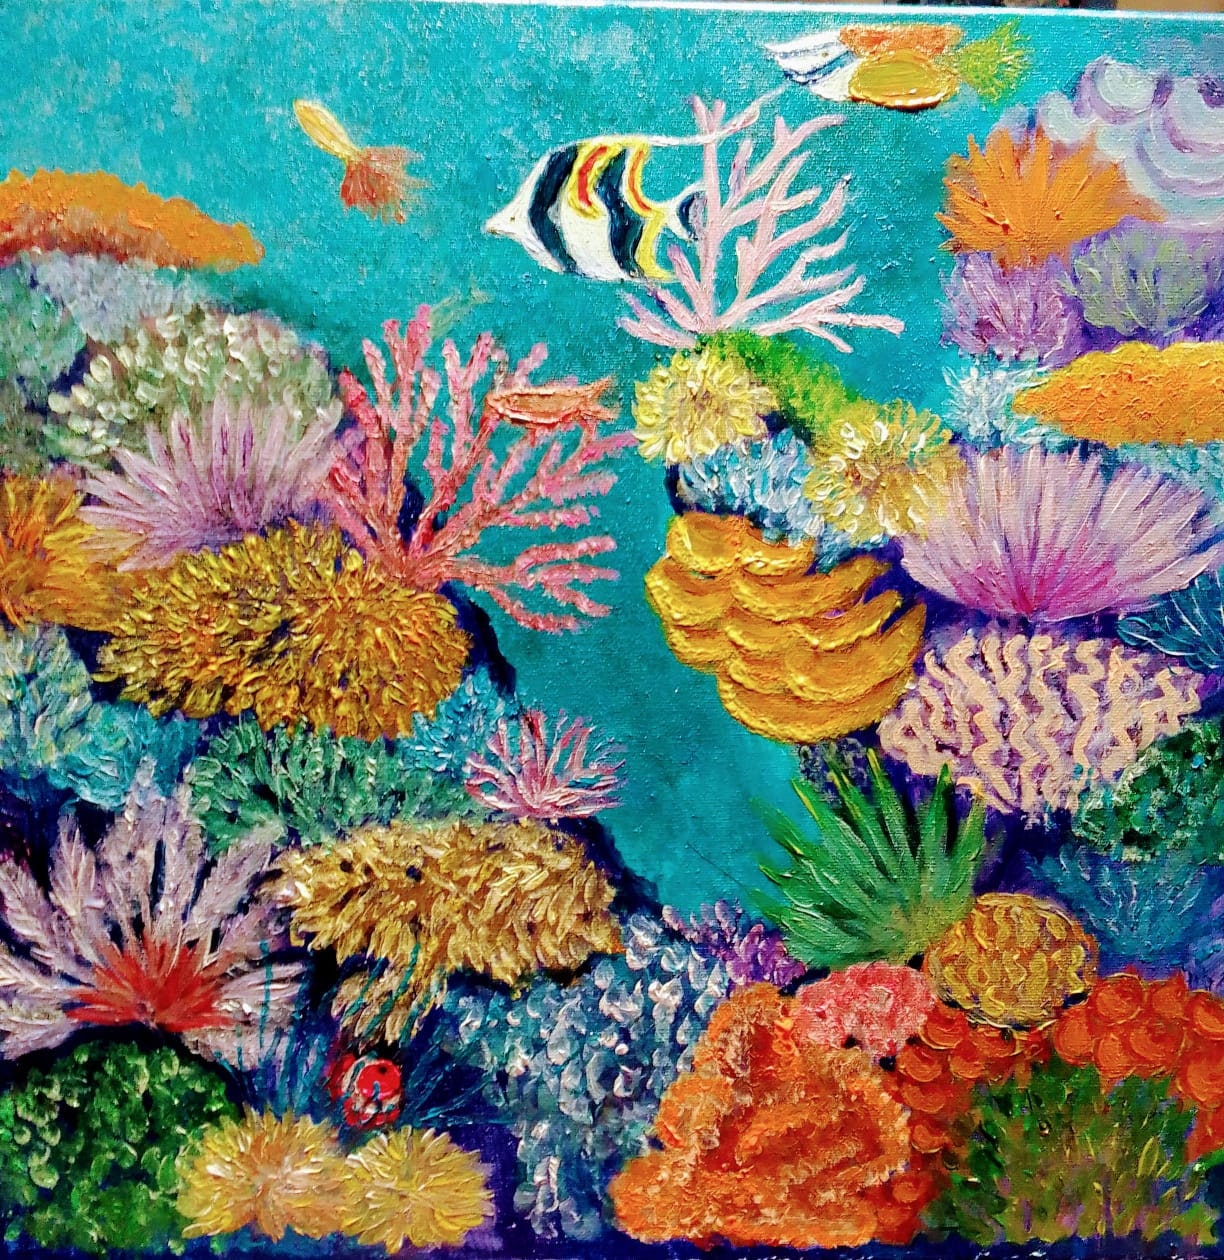 Underwater Painting Fish Art Seascape Painting Original Artwork Acrylic  Painting Blue Sea Wall Art Sea Life Painting by Canvasdreamson 